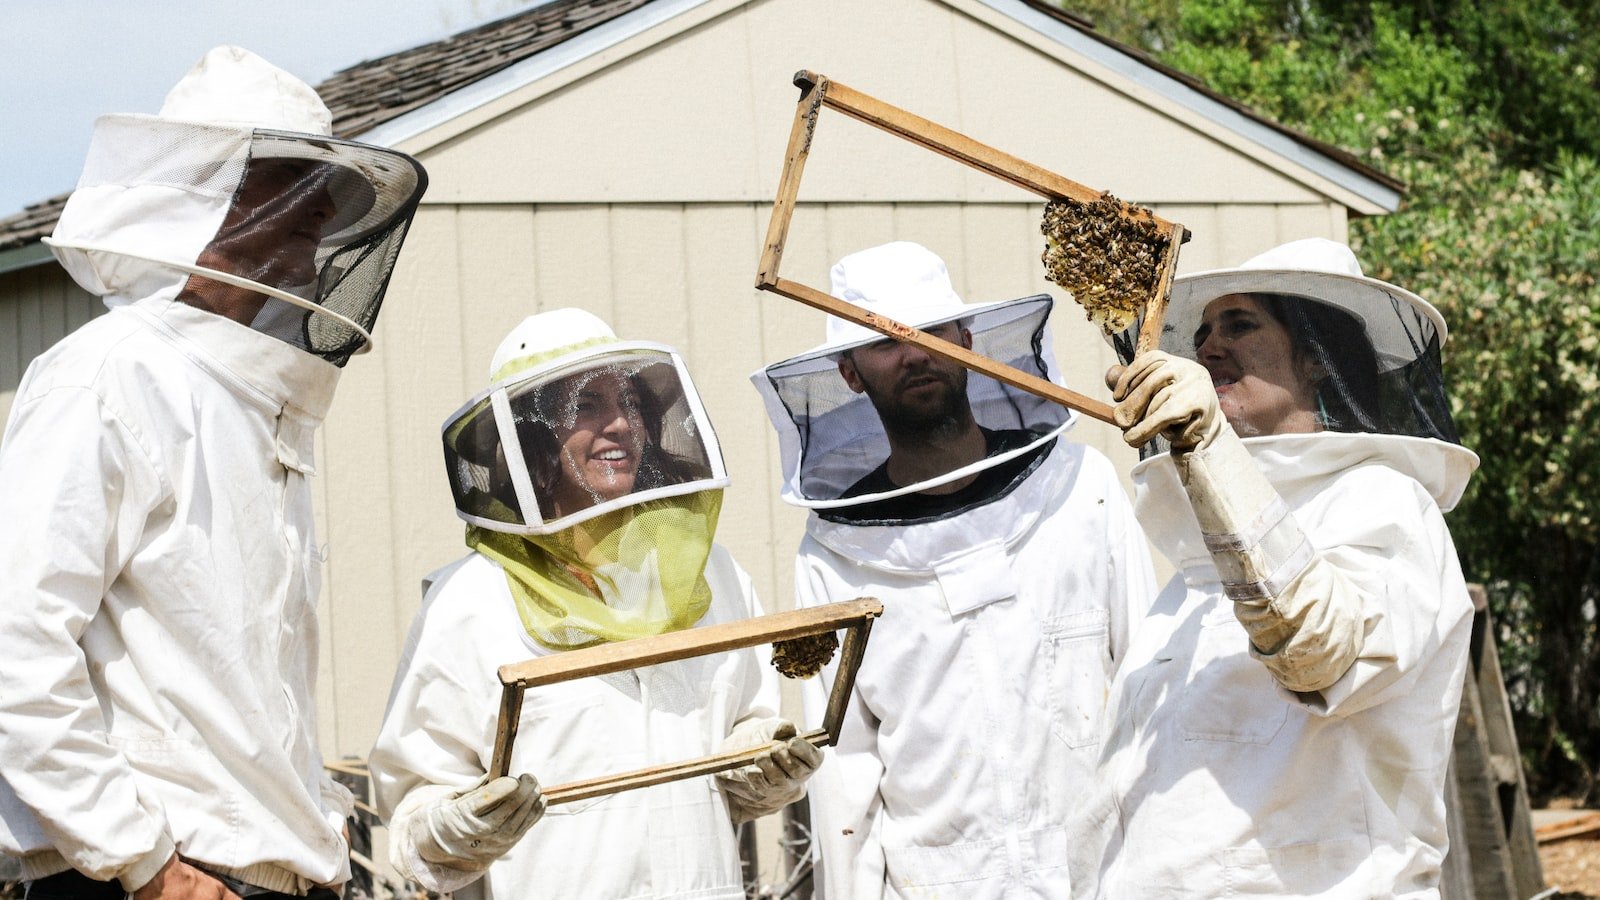 Preserving Traditional Wisdom: Beekeeping as a Cultural Practice